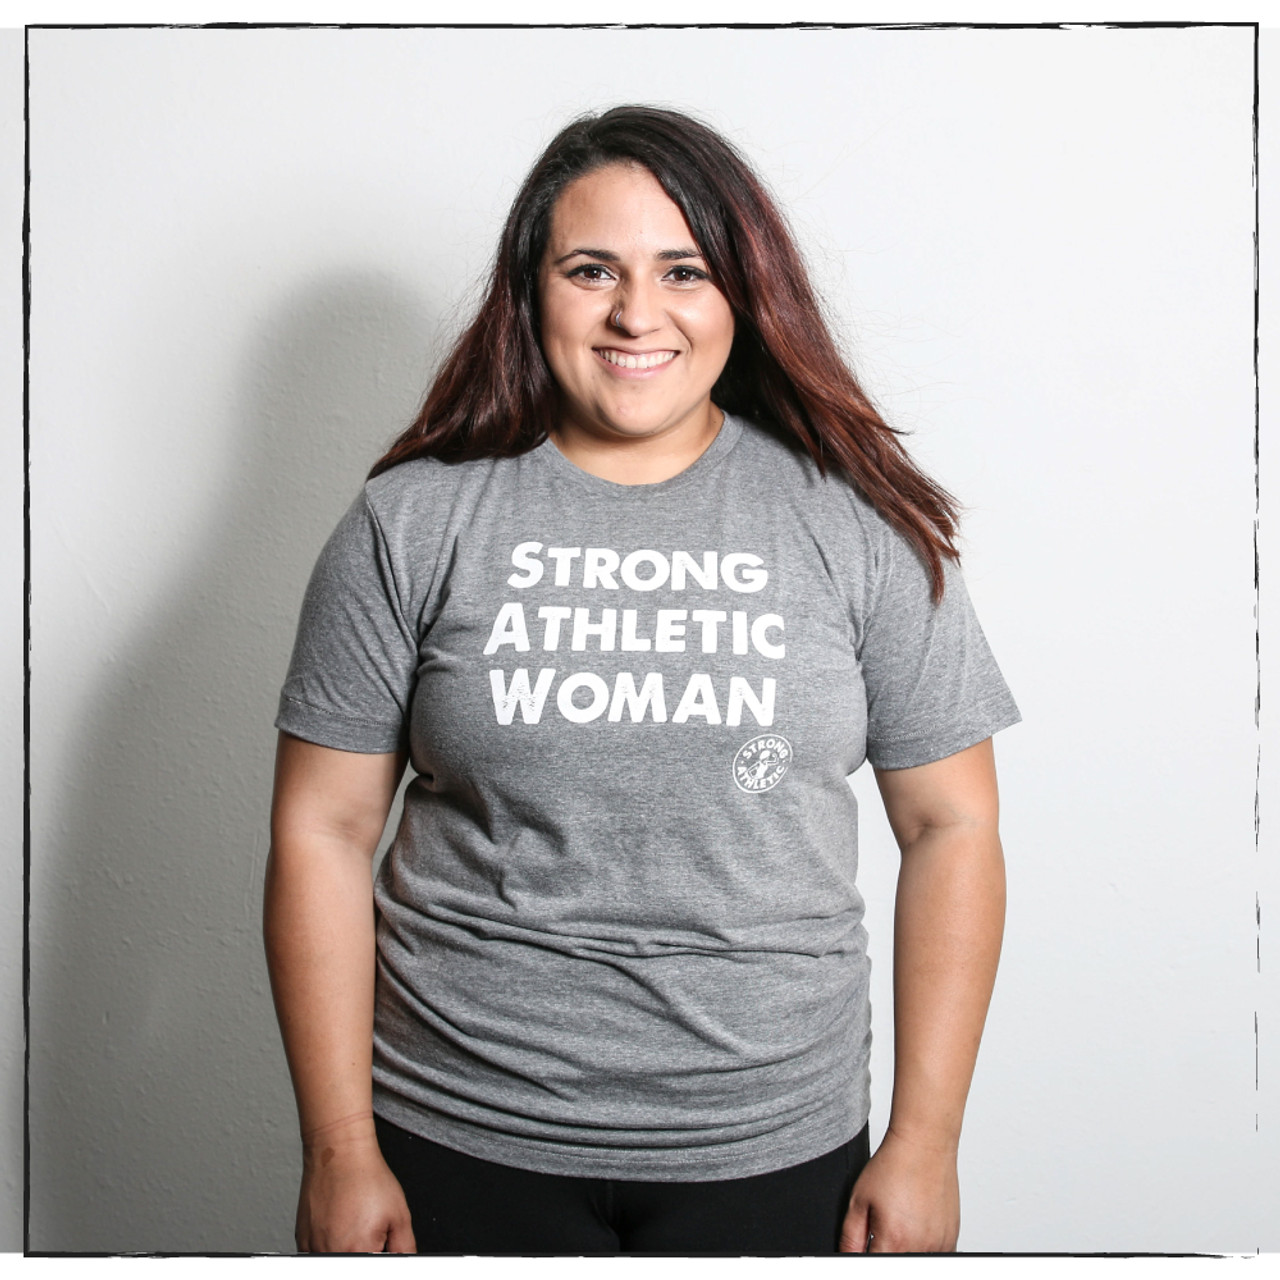 https://cdn11.bigcommerce.com/s-5nhnnhhl3t/images/stencil/1280x1280/products/135/5265/shirts-with-slogans-on-them-for-females-who-play-sports-the-strong-athletic-woman-t-shirt-woman-owned-company__78445.1664324805.jpg?c=2